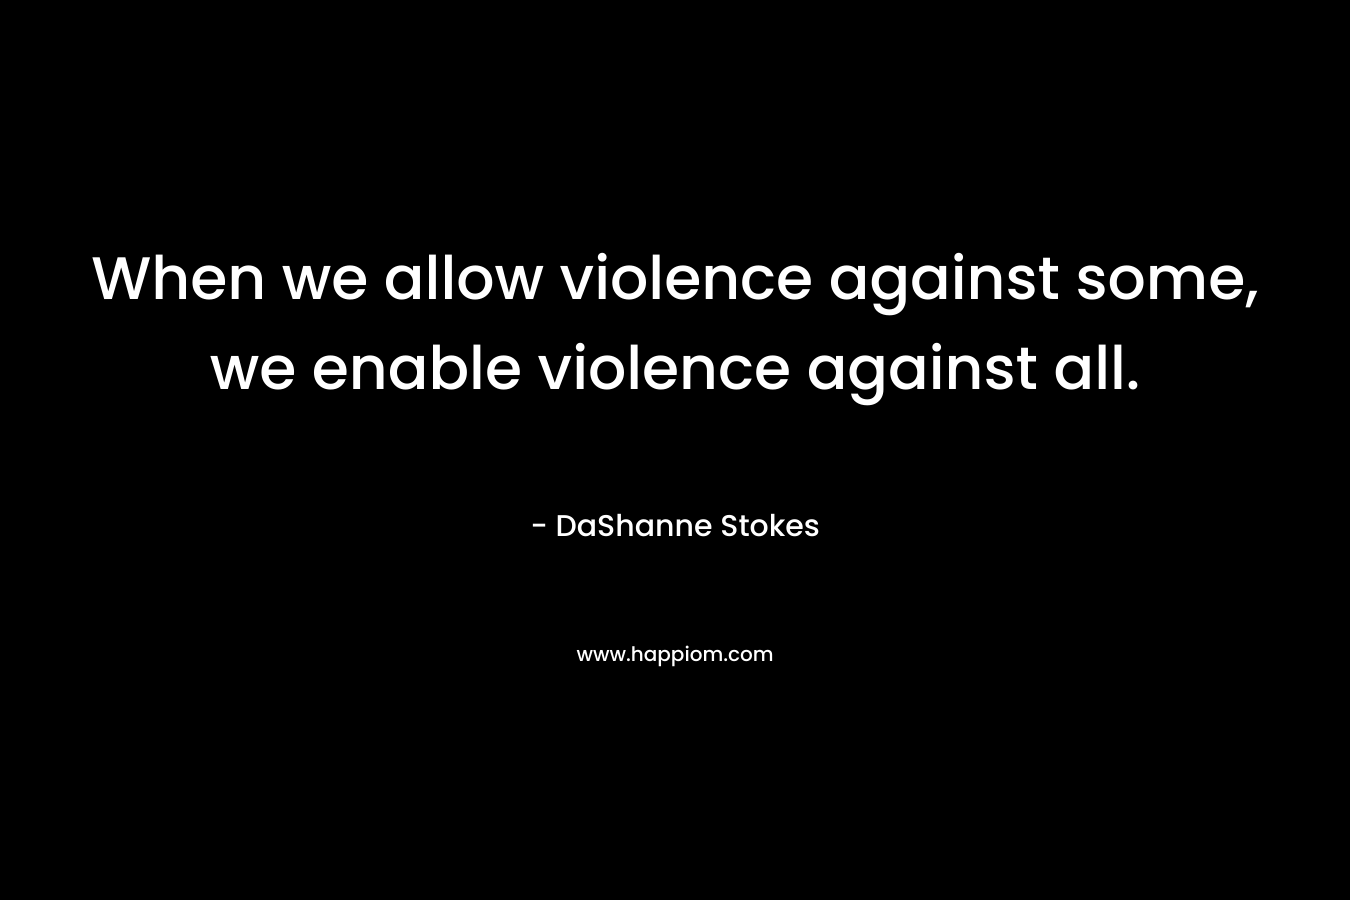 When we allow violence against some, we enable violence against all.